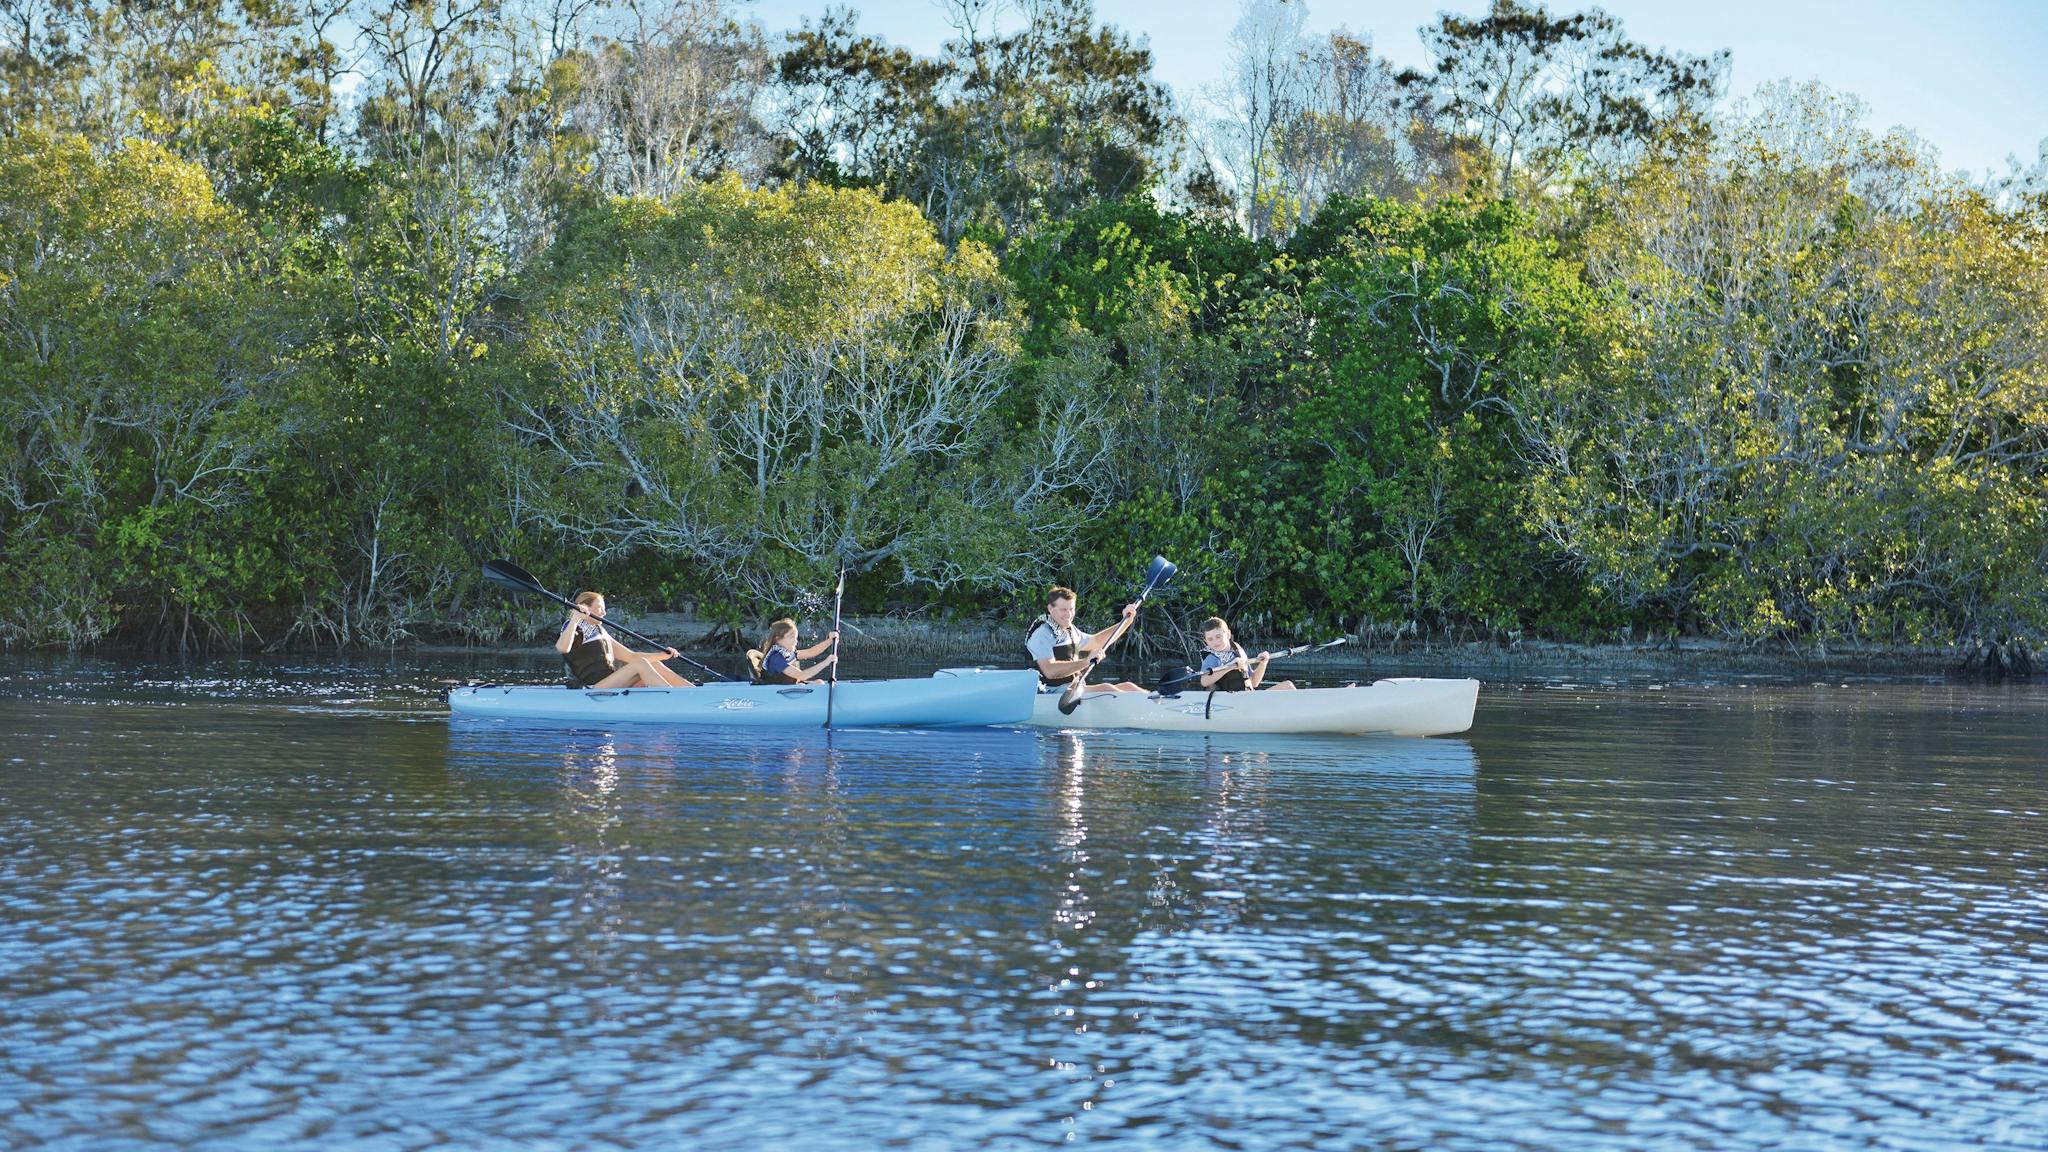 kids and canoes in water with mangroves in background, Bribie Island